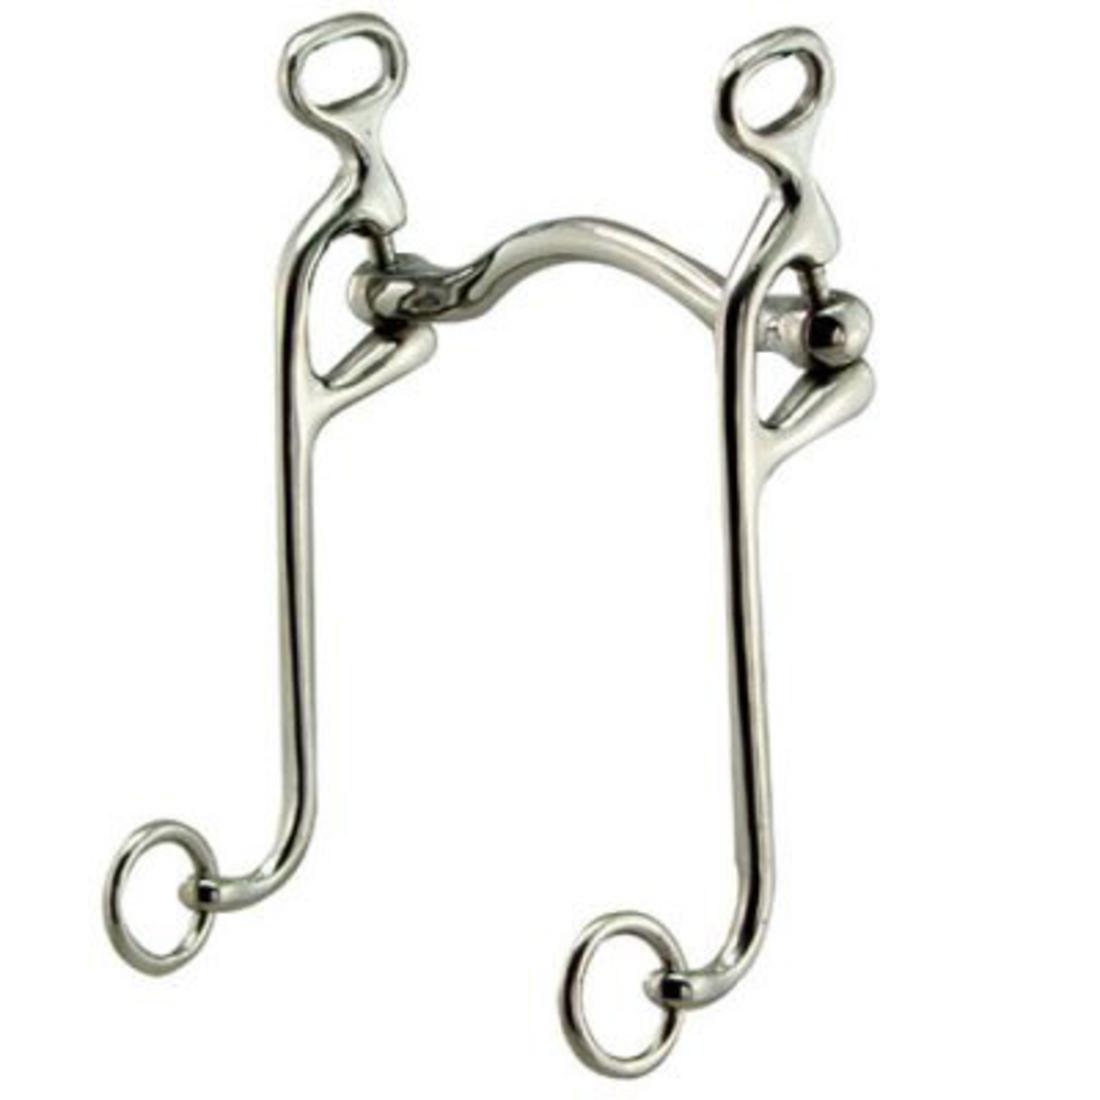 NEW HORSE TACK! Stainless Steel Sliding Walking Horse Bit With 5" Port Mouth 